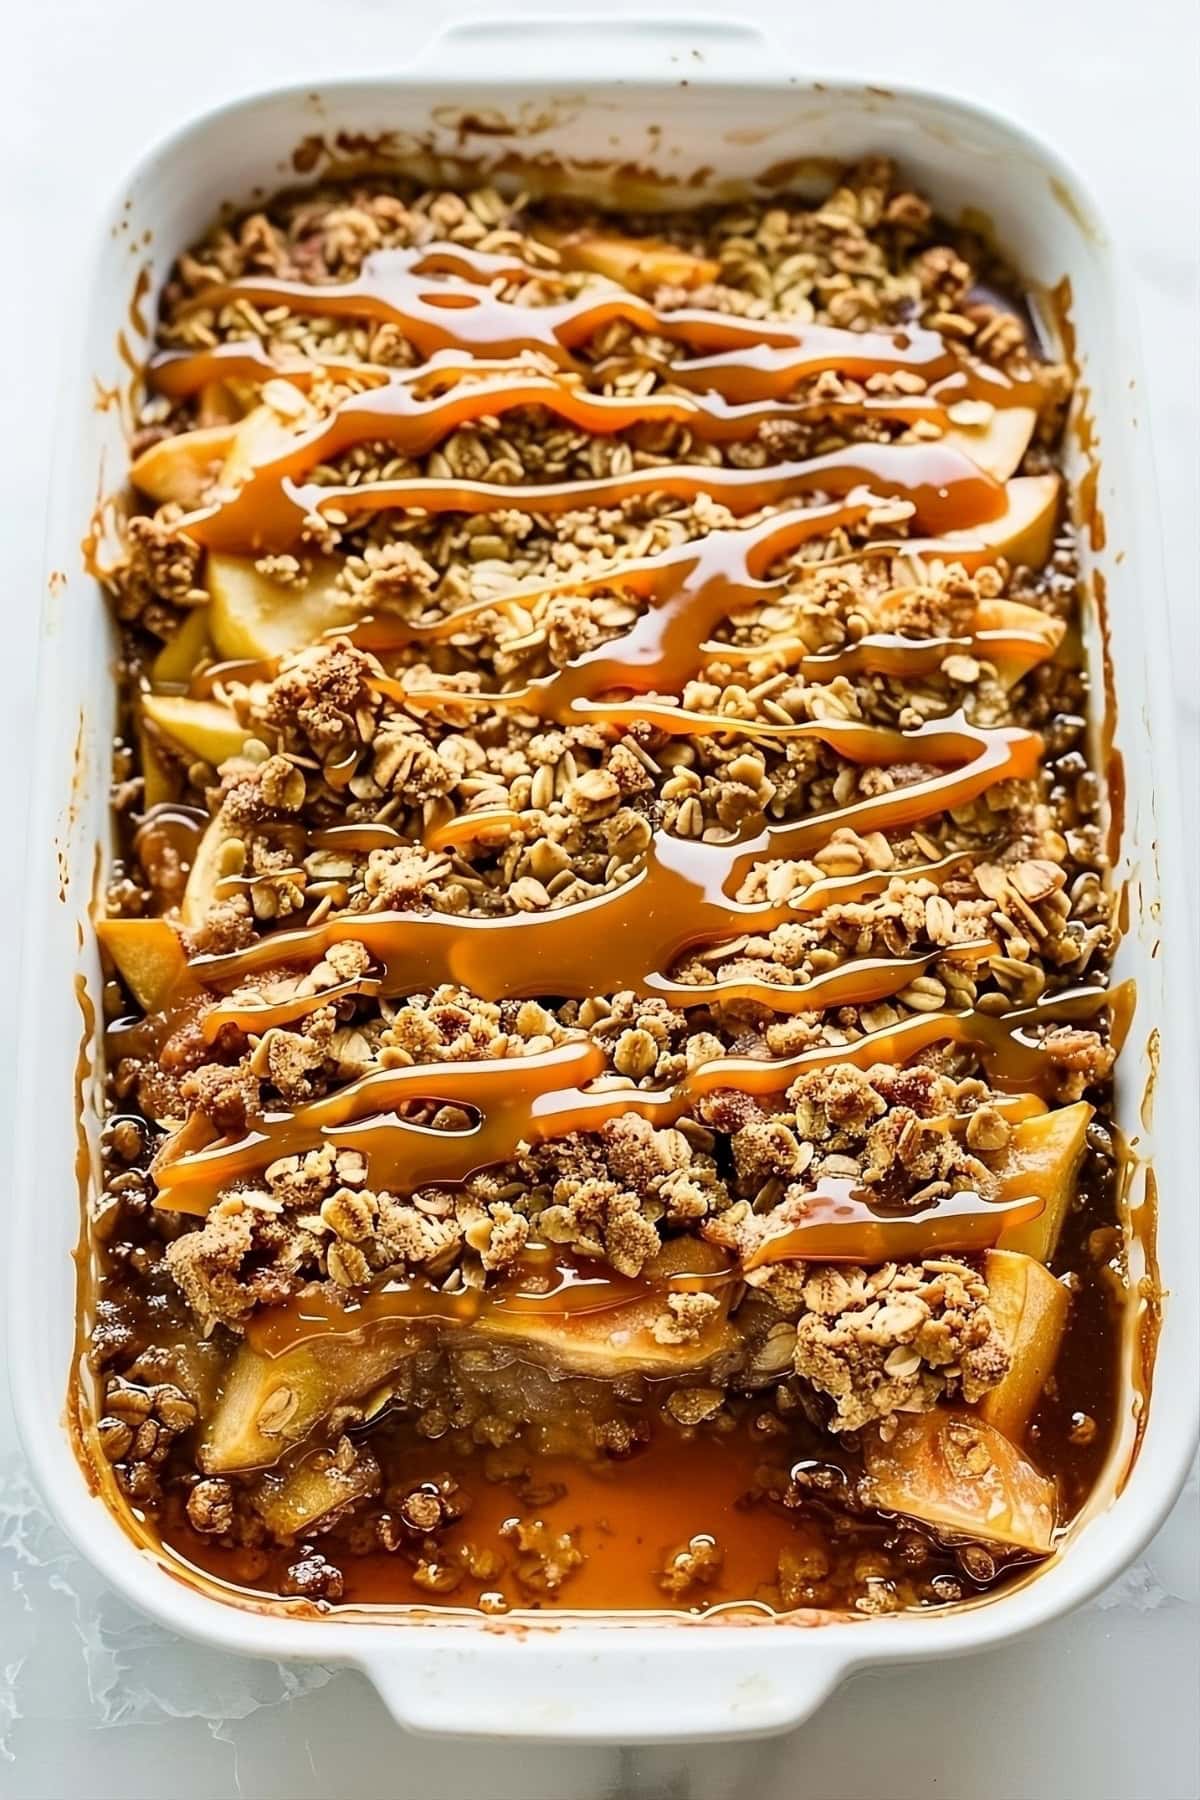 Apple crisp in a baking dish drizzled with caramel sauce, top down view